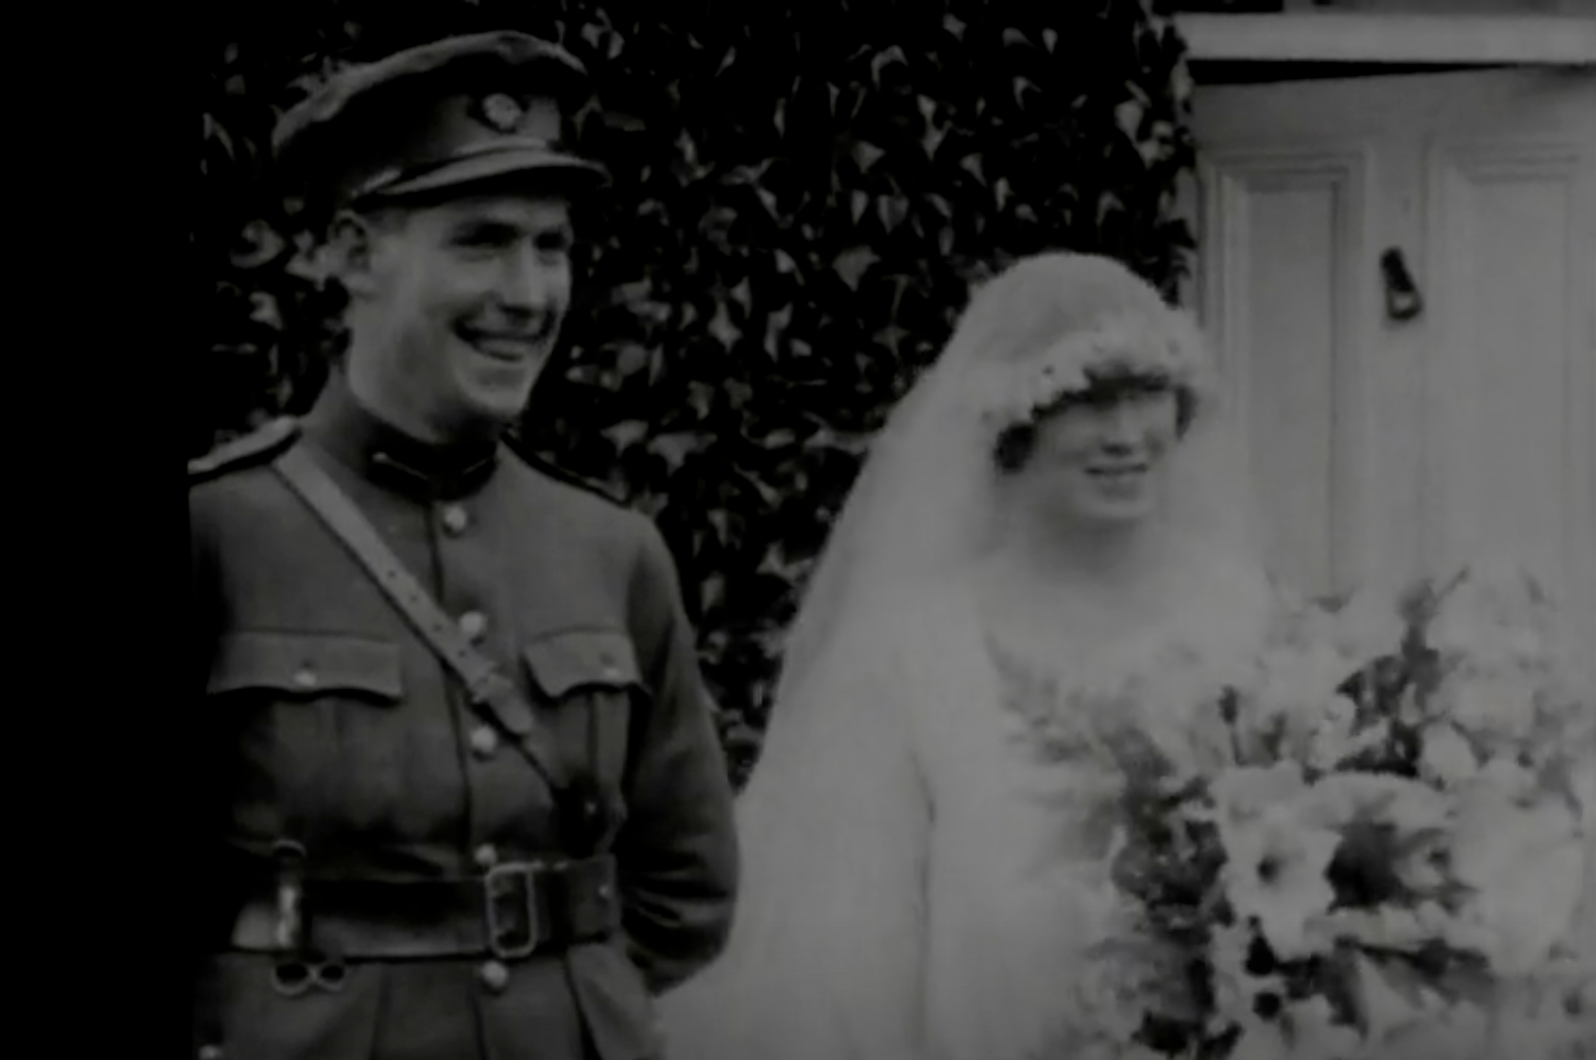 General Seán Mac Eoin and Alice Cooney on their wedding day